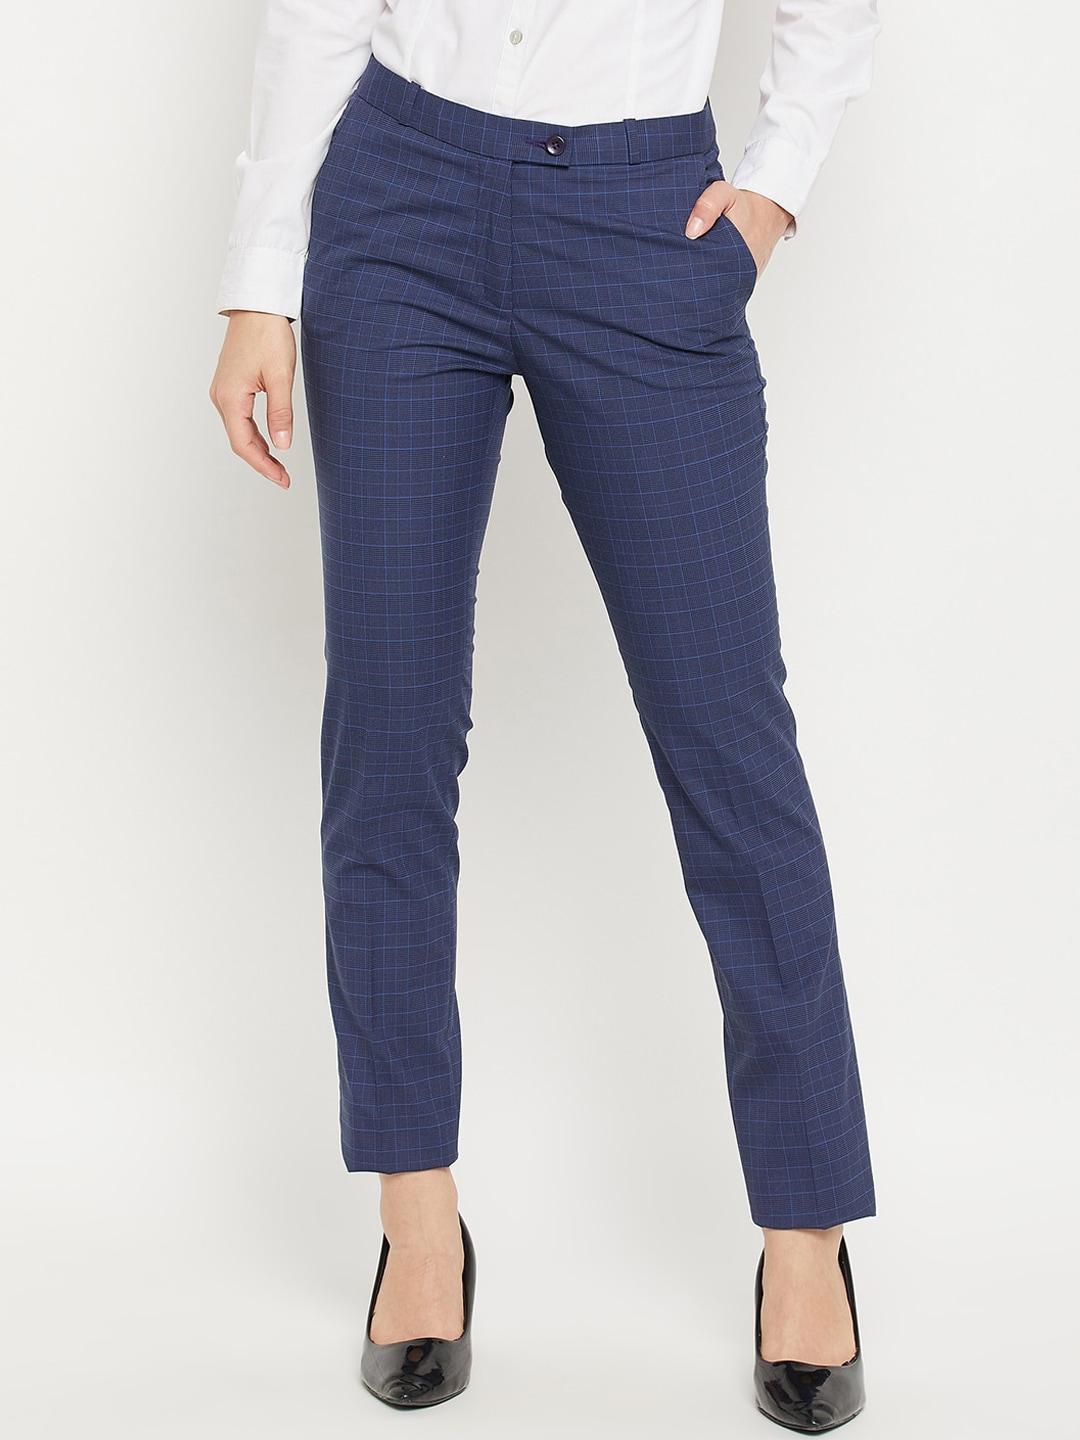 crozo-by-cantabil-women-navy-blue-checked-formal-trouser